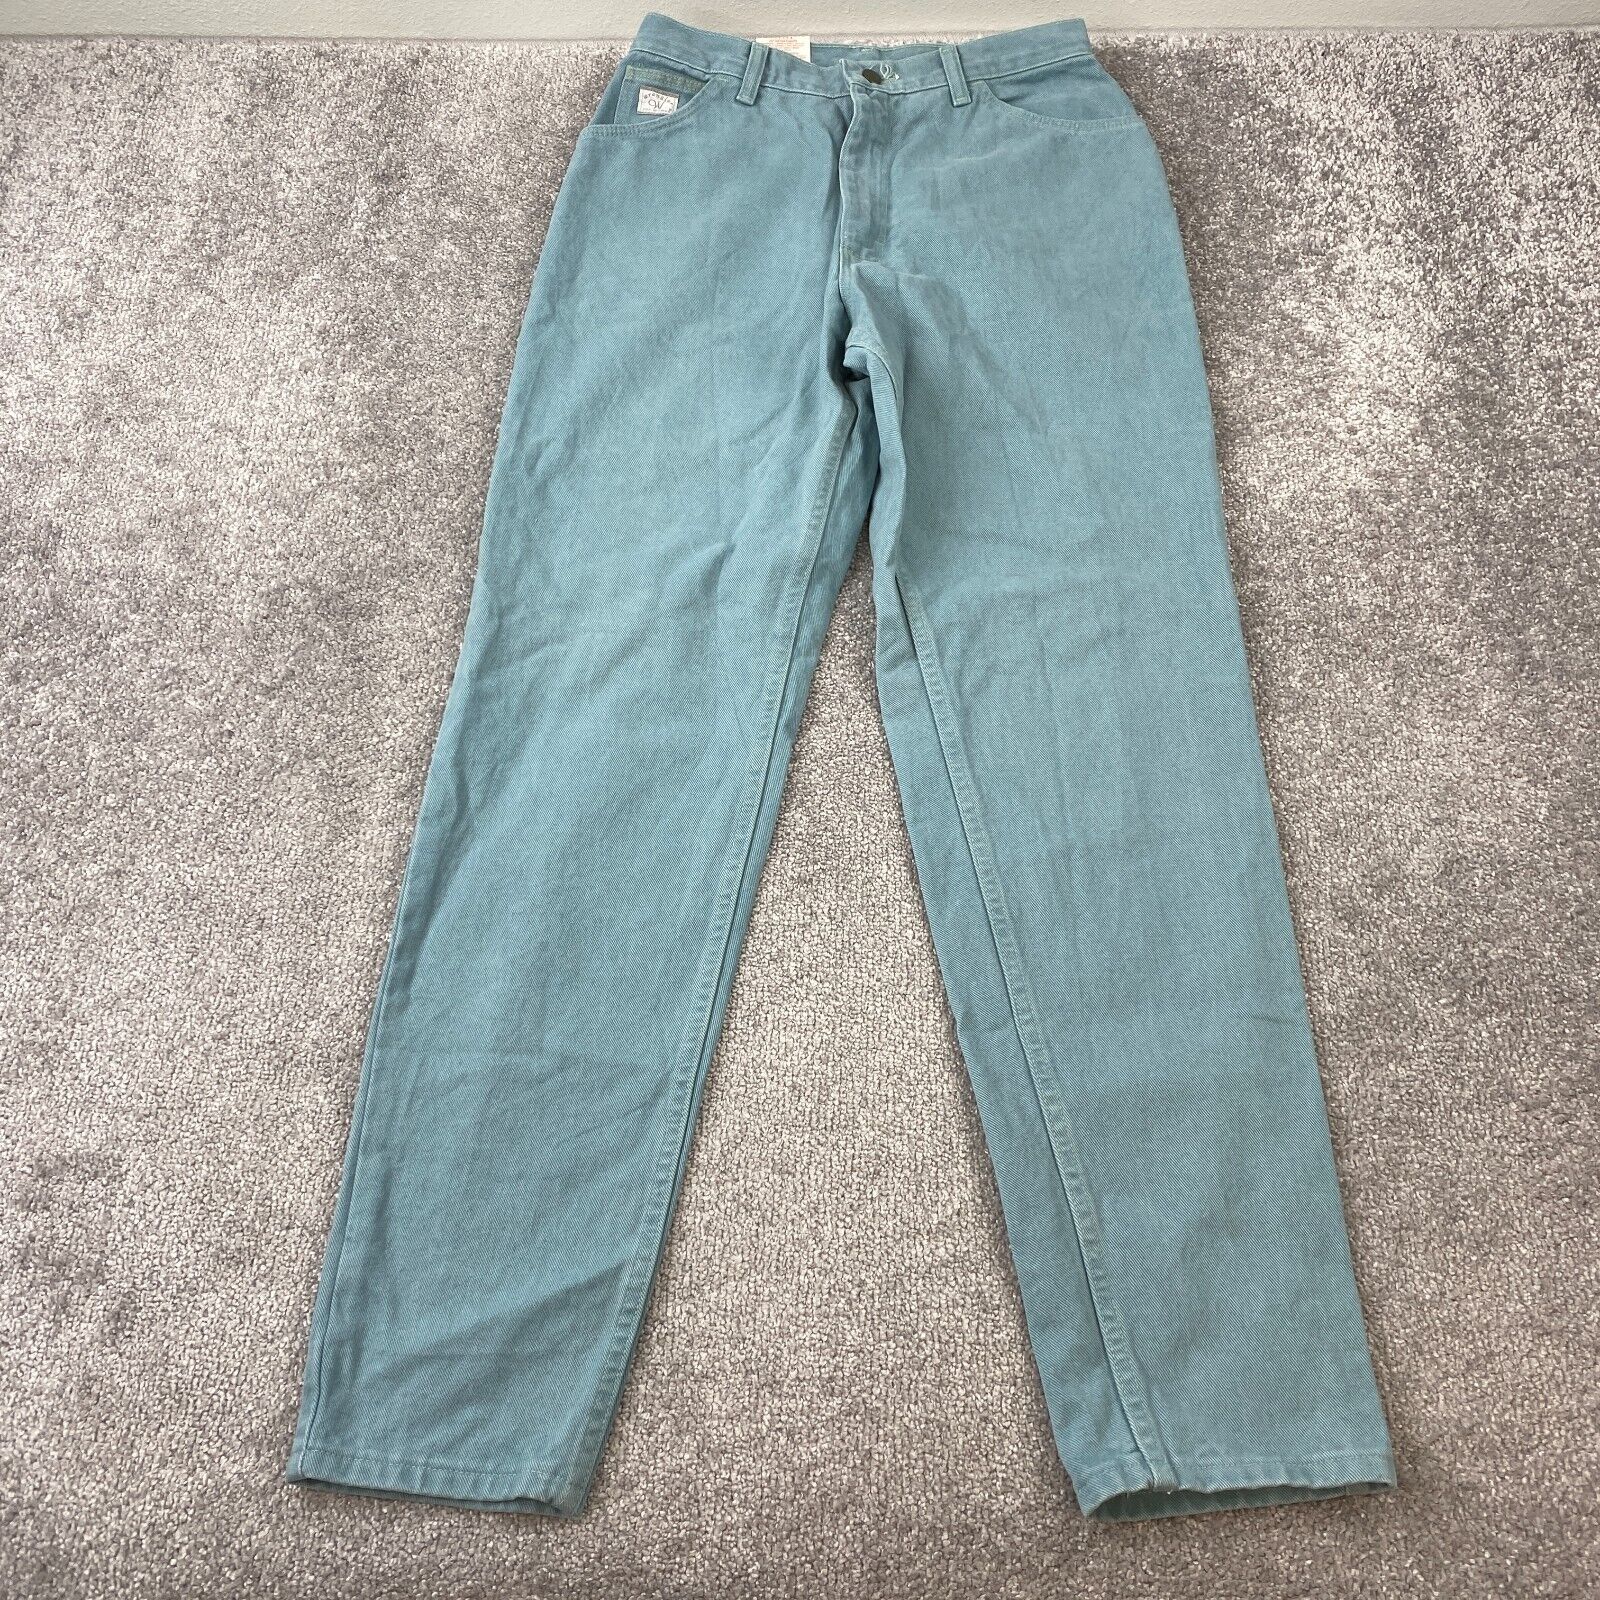 VINTAGE DEADSTOCK NWT Wrangler Relaxed Straight Jeans Women\'s 12x32 Turquoise